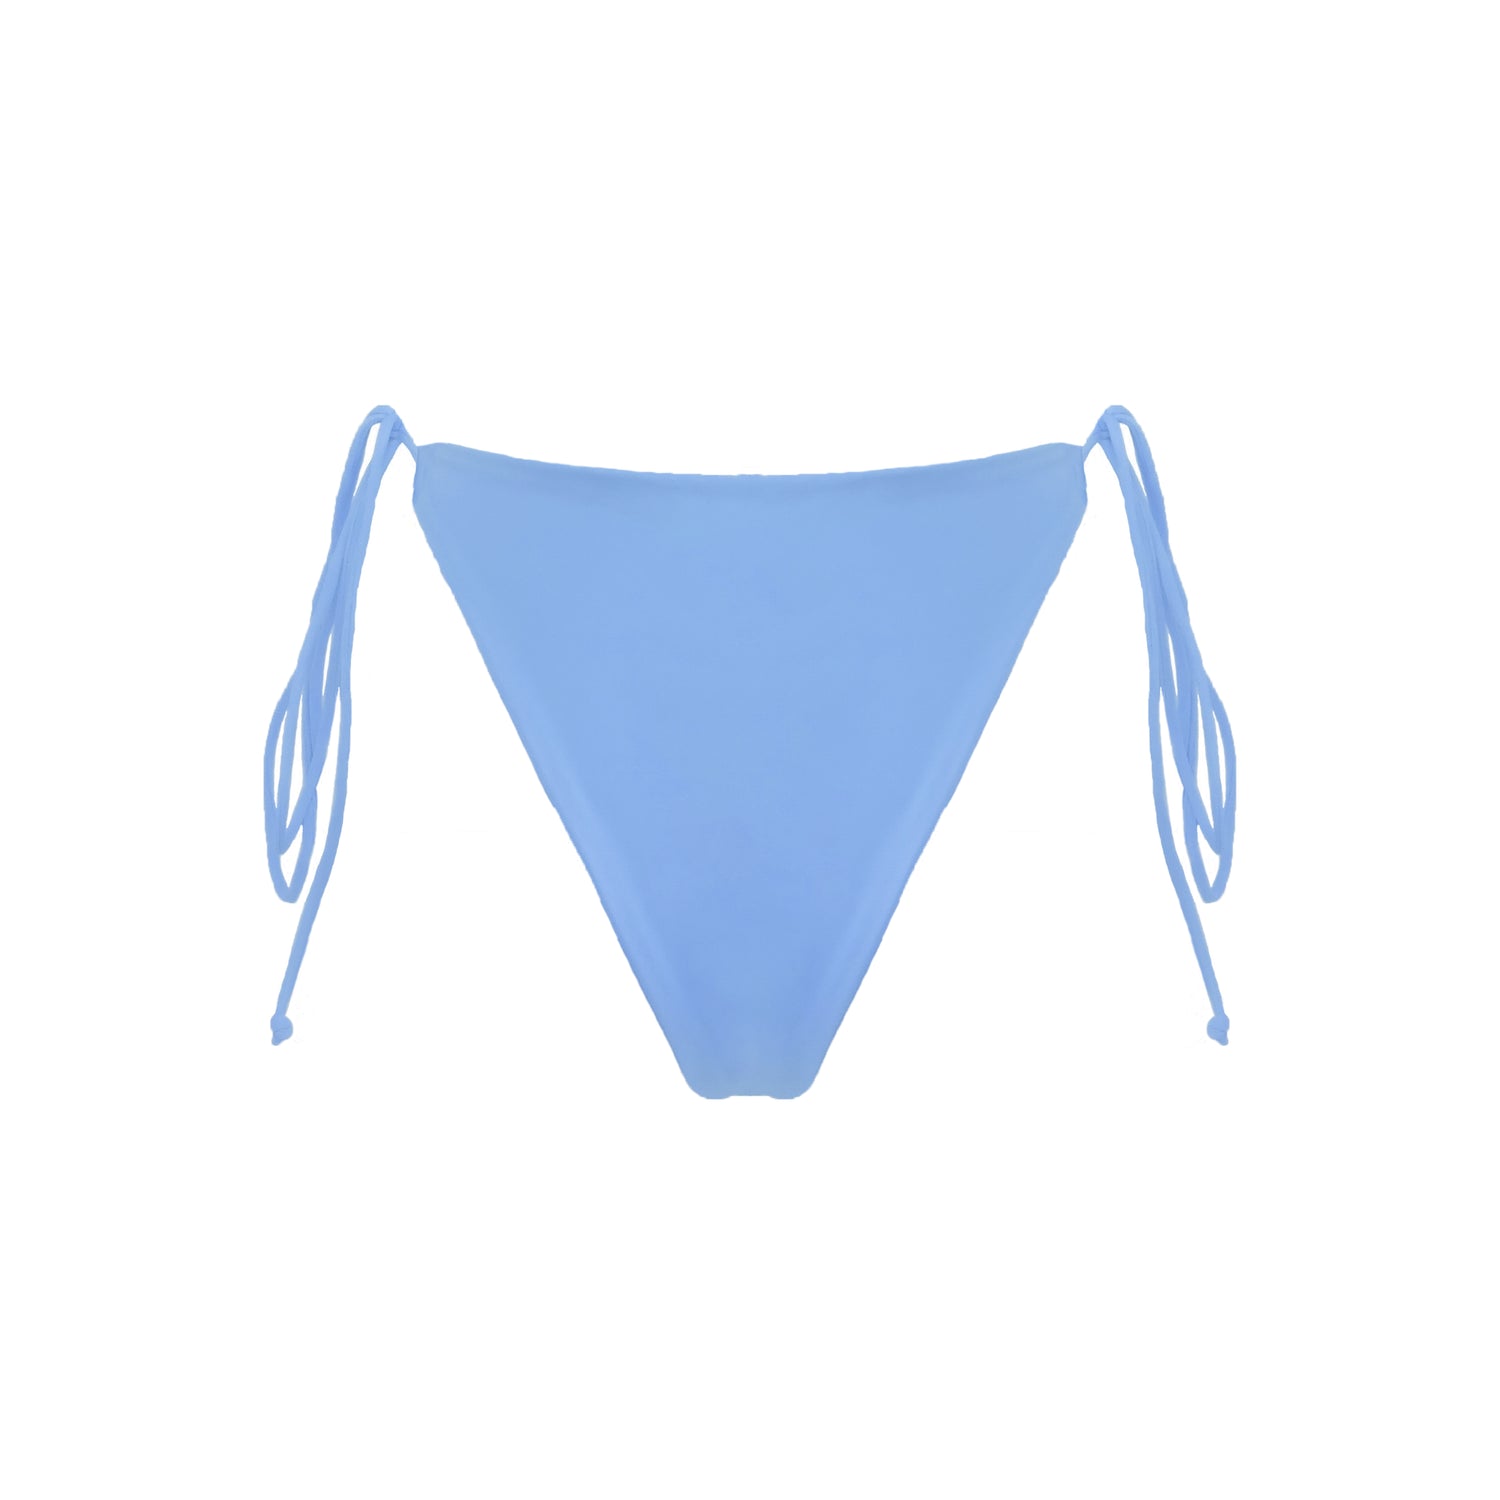 Back view of periwinkle blue Ravello bikini bottom with adjustable side tie straps and cheeky bum coverage.